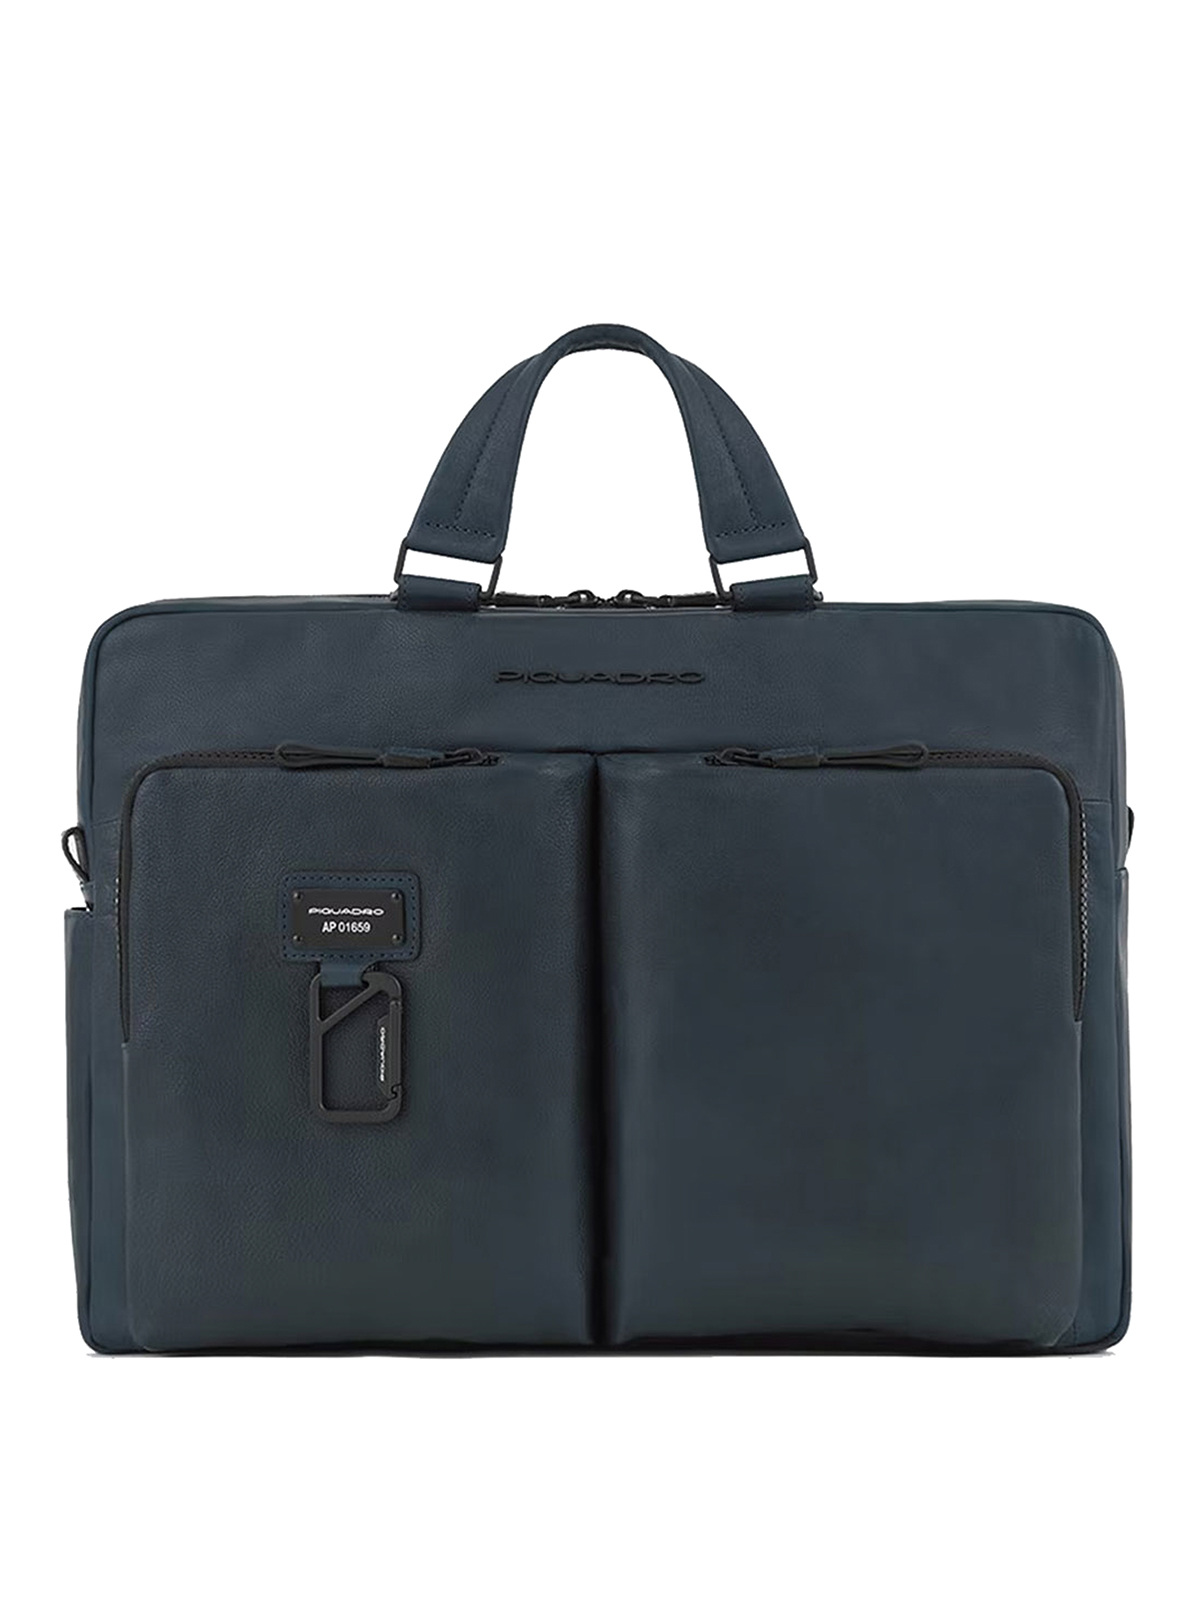 PIQUADRO BRIEFCASE TWO HANDLES IN LEATHER